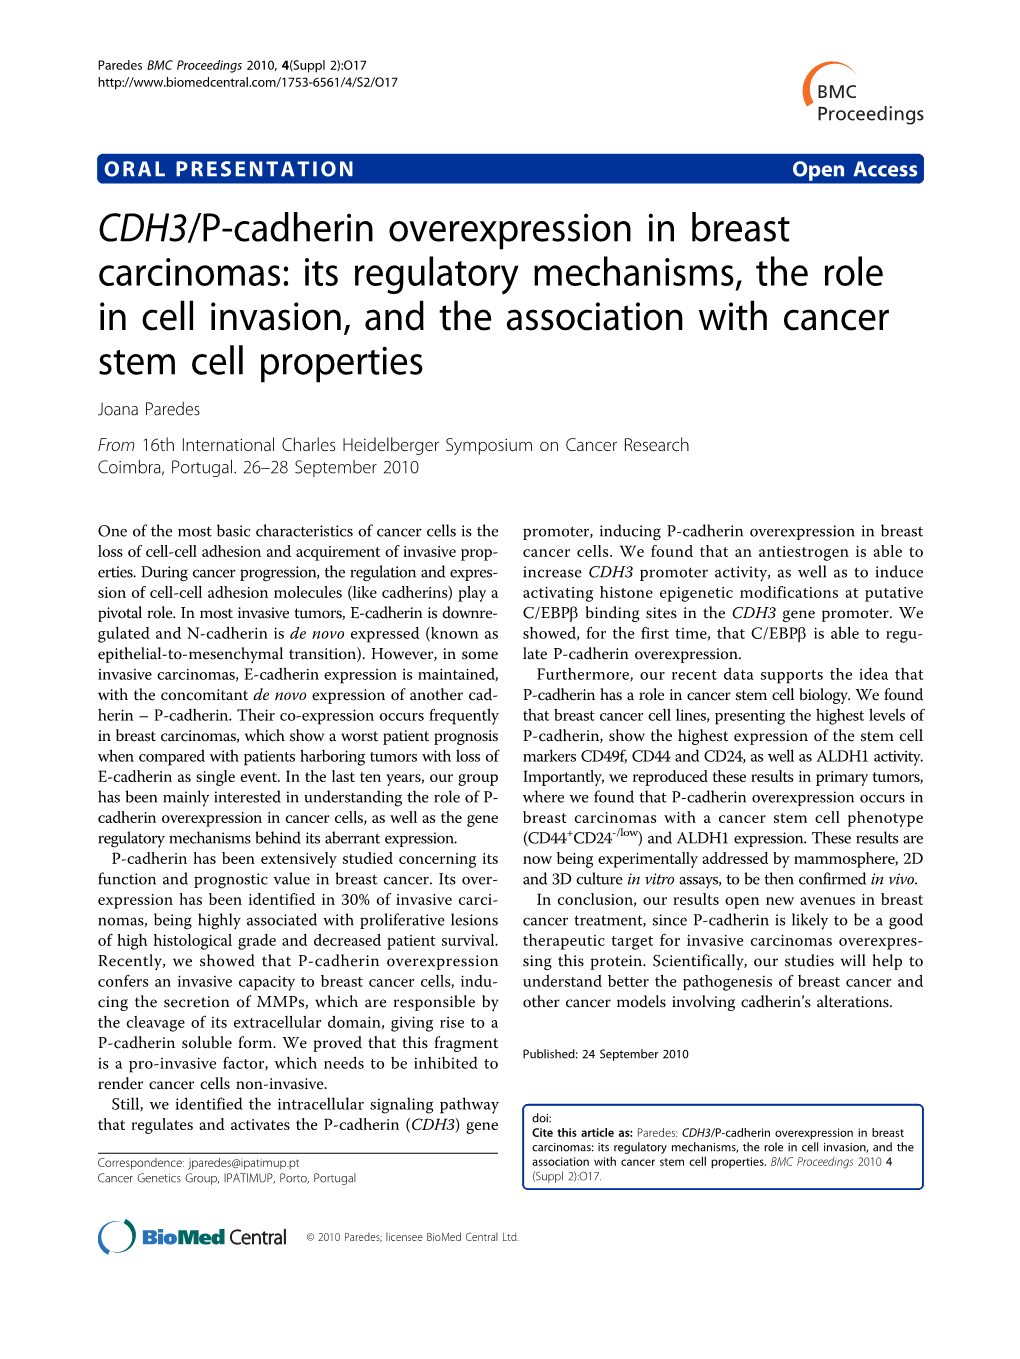 CDH3/P-Cadherin Overexpression in Breast Carcinomas